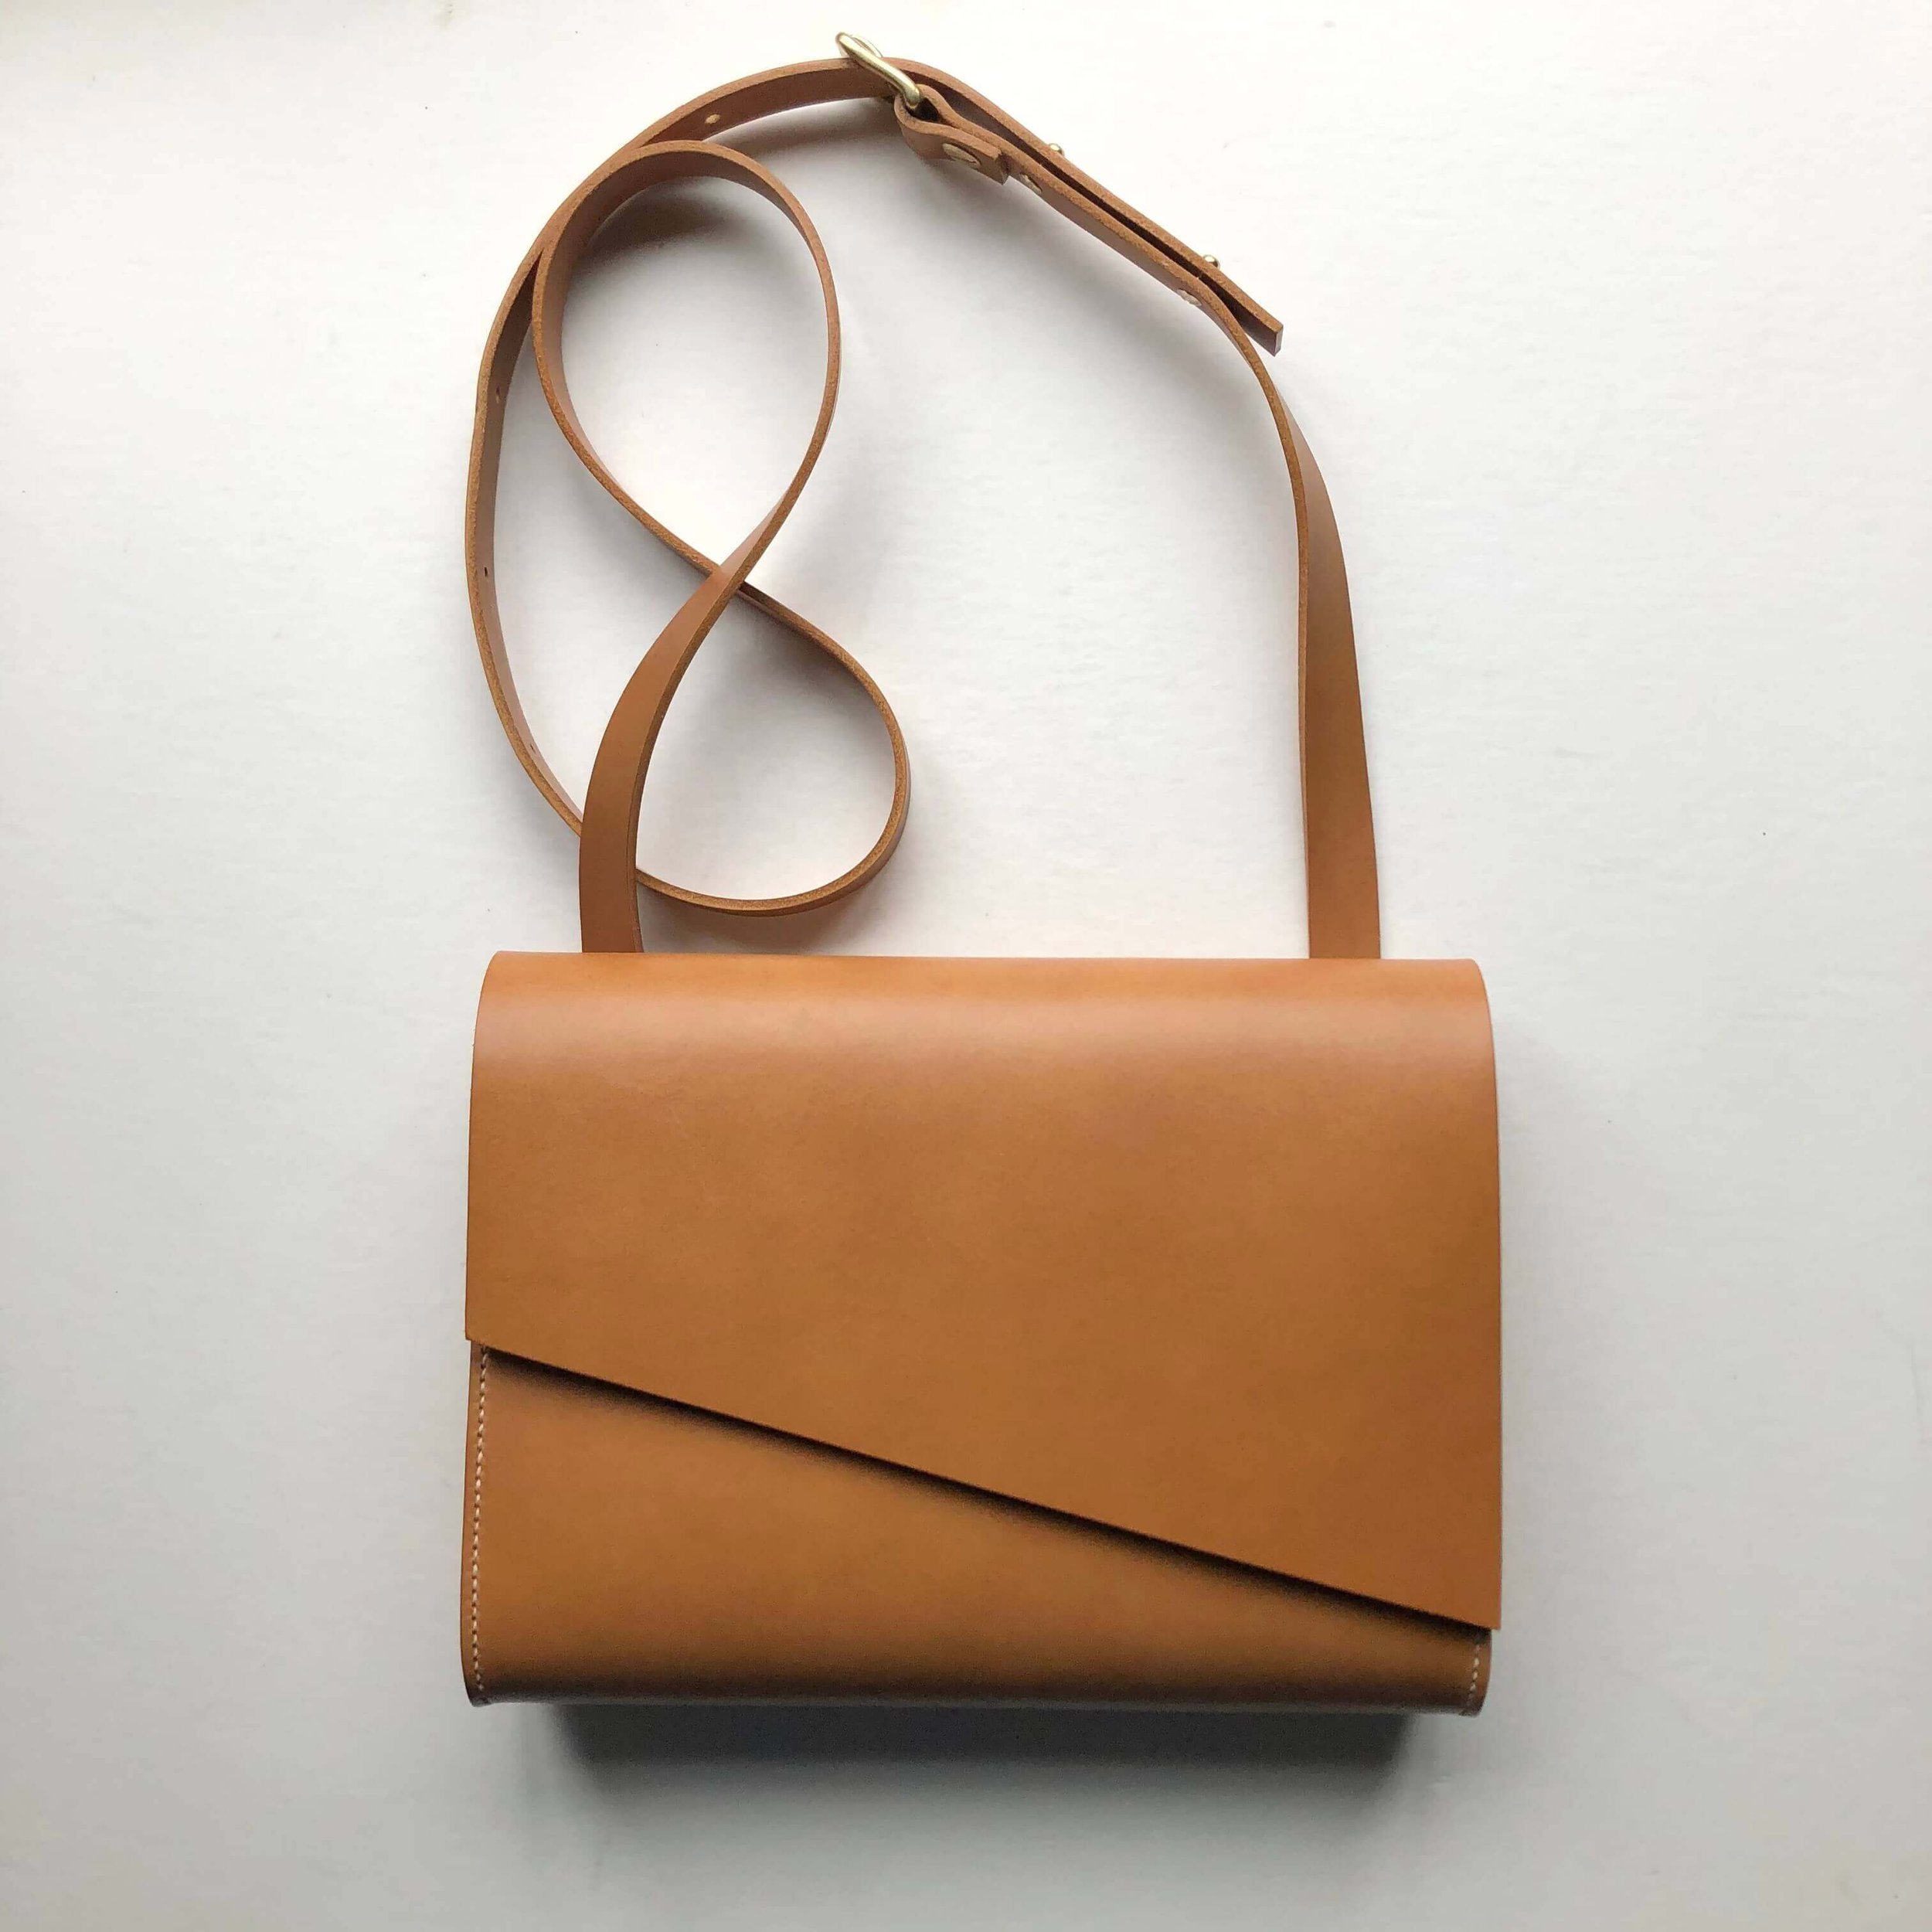 Ethical Leather Bags & Accessories. Sustainably Made in the UK — CARV